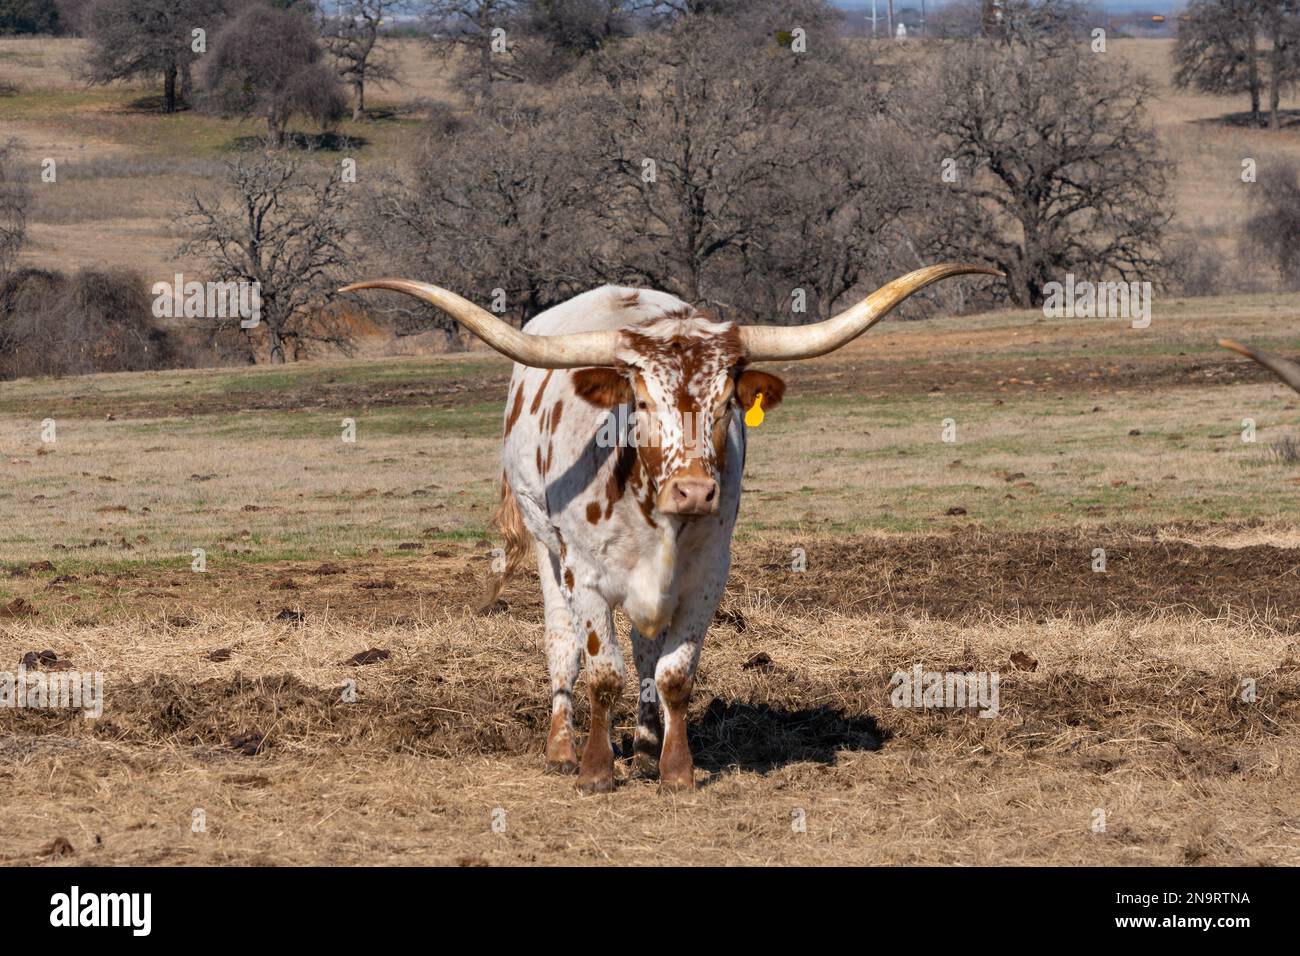 A white Longhorn cow with long, curved horns and orange spots standing in a ranch pasture with trees in the background on a sunny day. Stock Photo